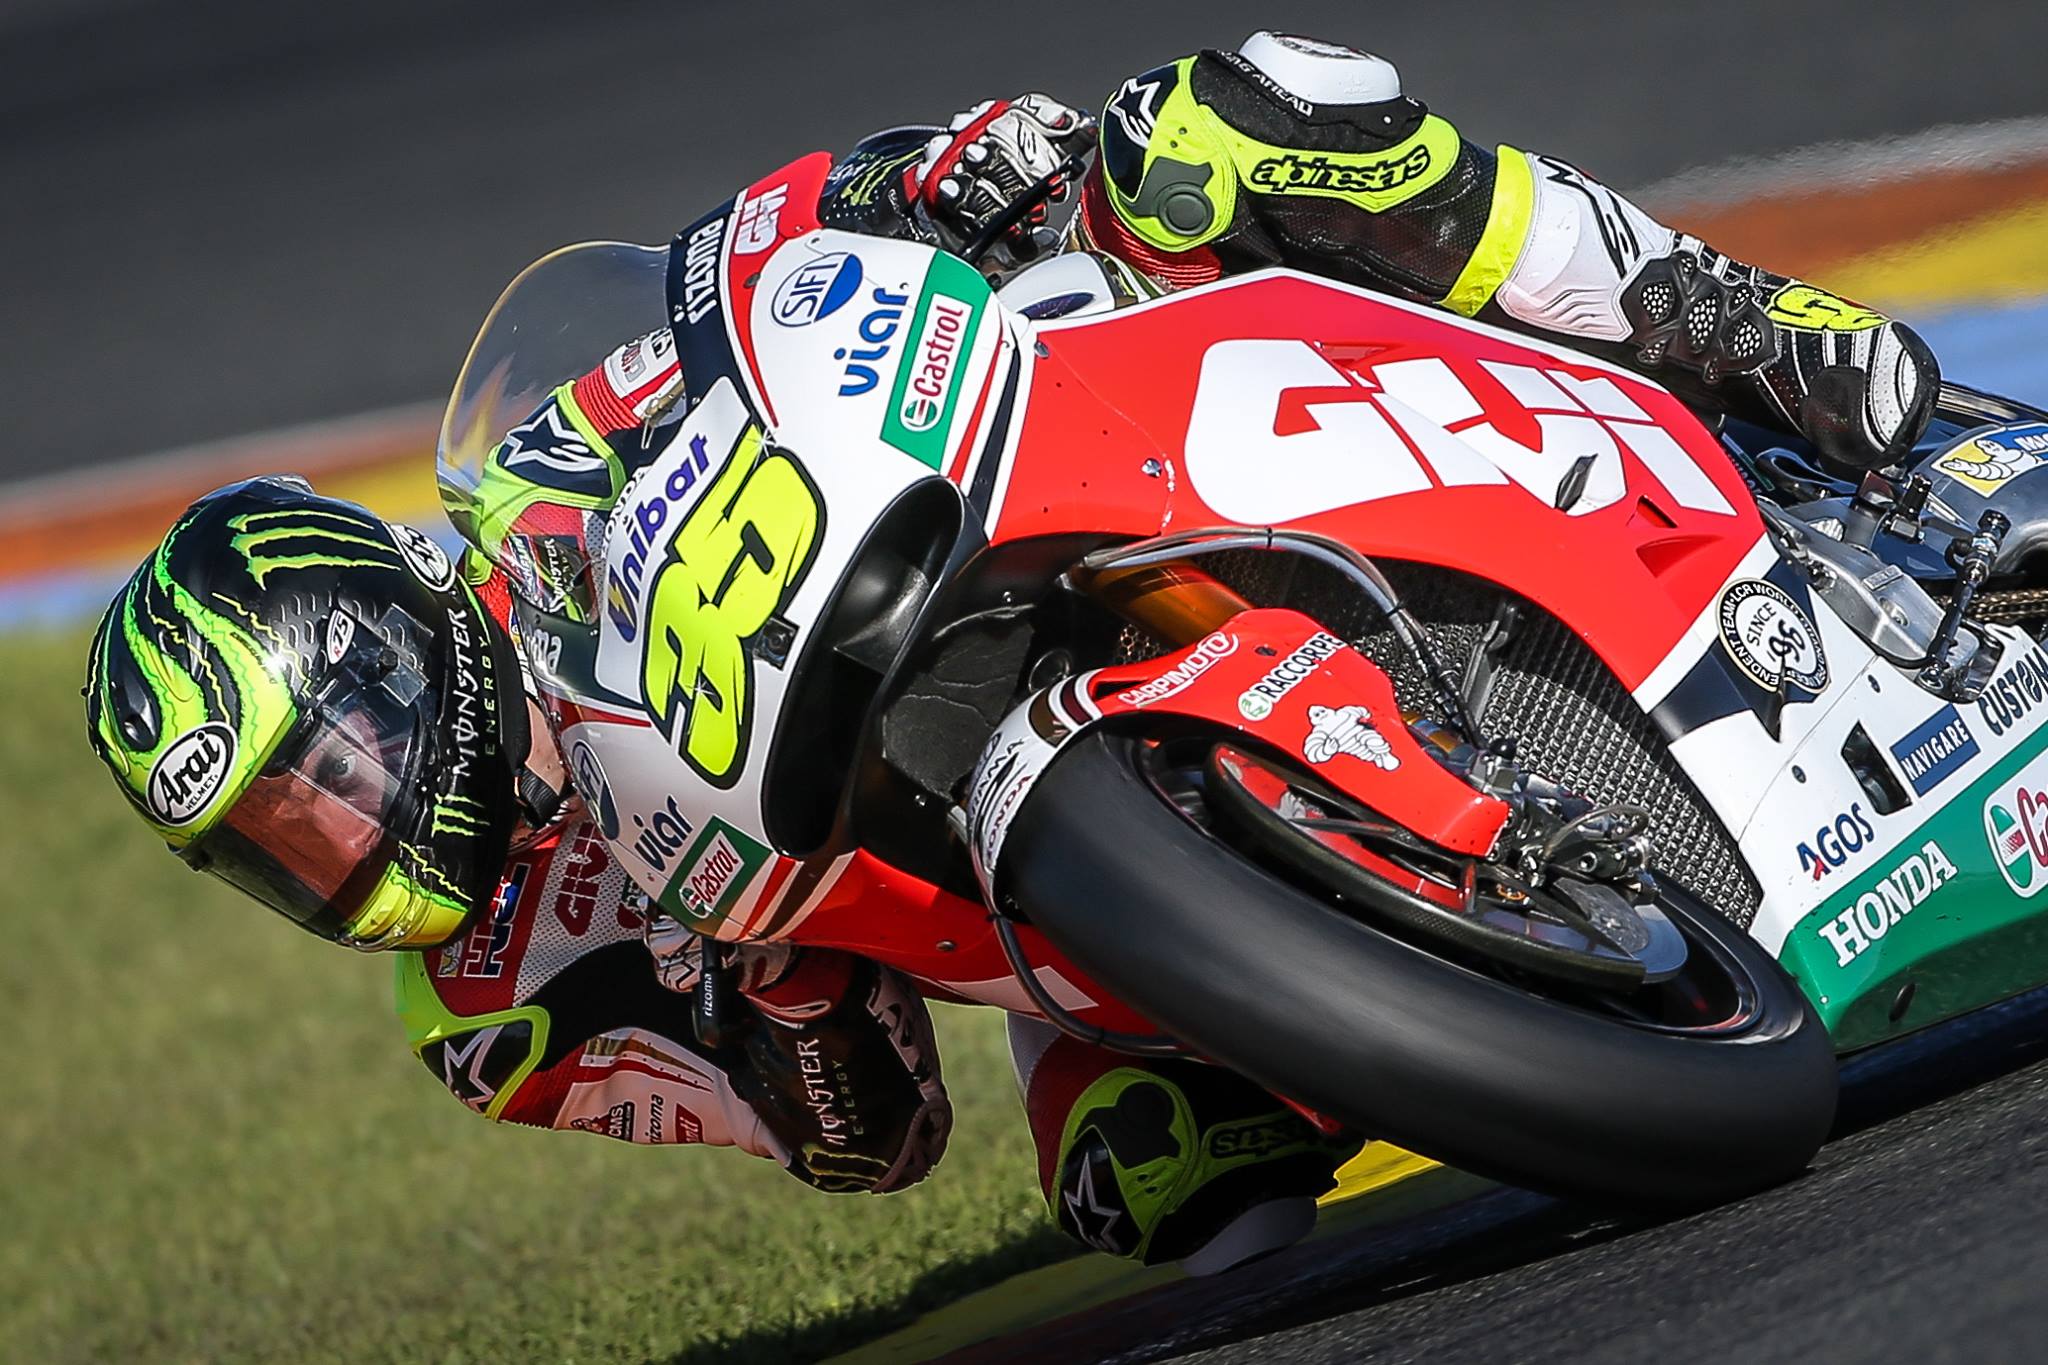 Crutchlow concludes Valencia test in sixth